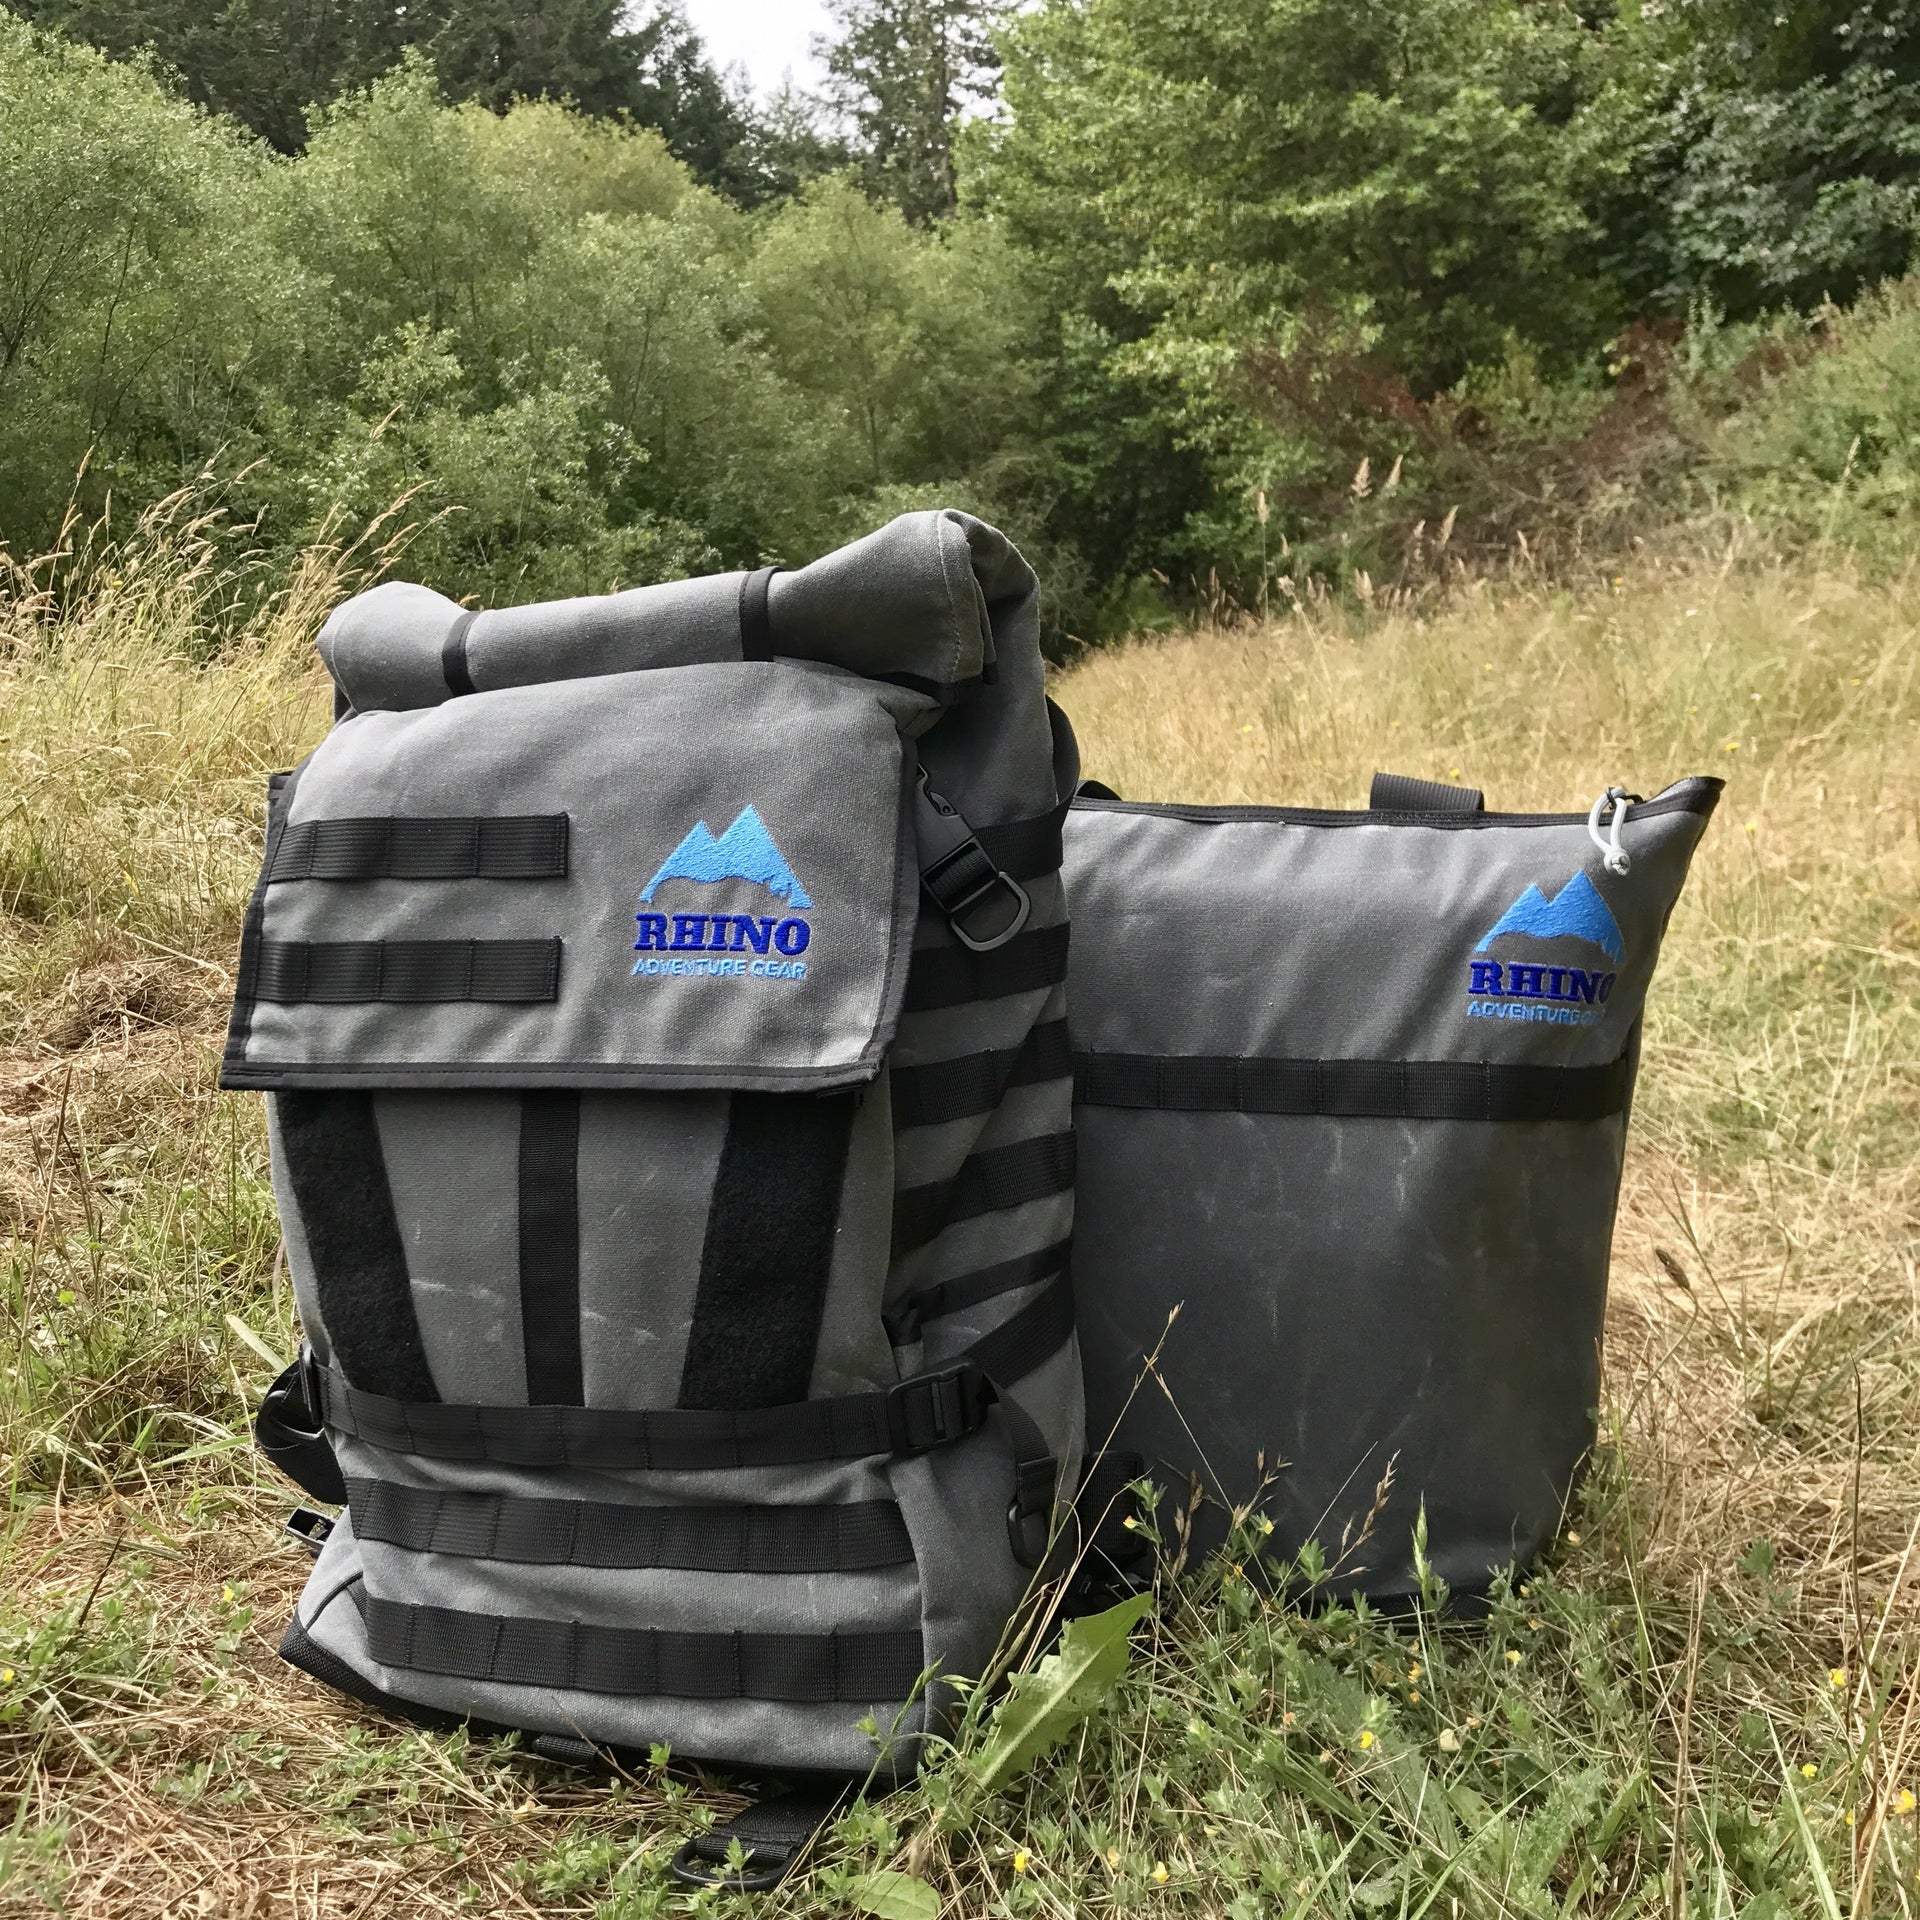 Adventure Tote Bag and Adventure Backpack, both grey with black trim and blue Rhino Adventure Gear logo shown sitting in grassy field